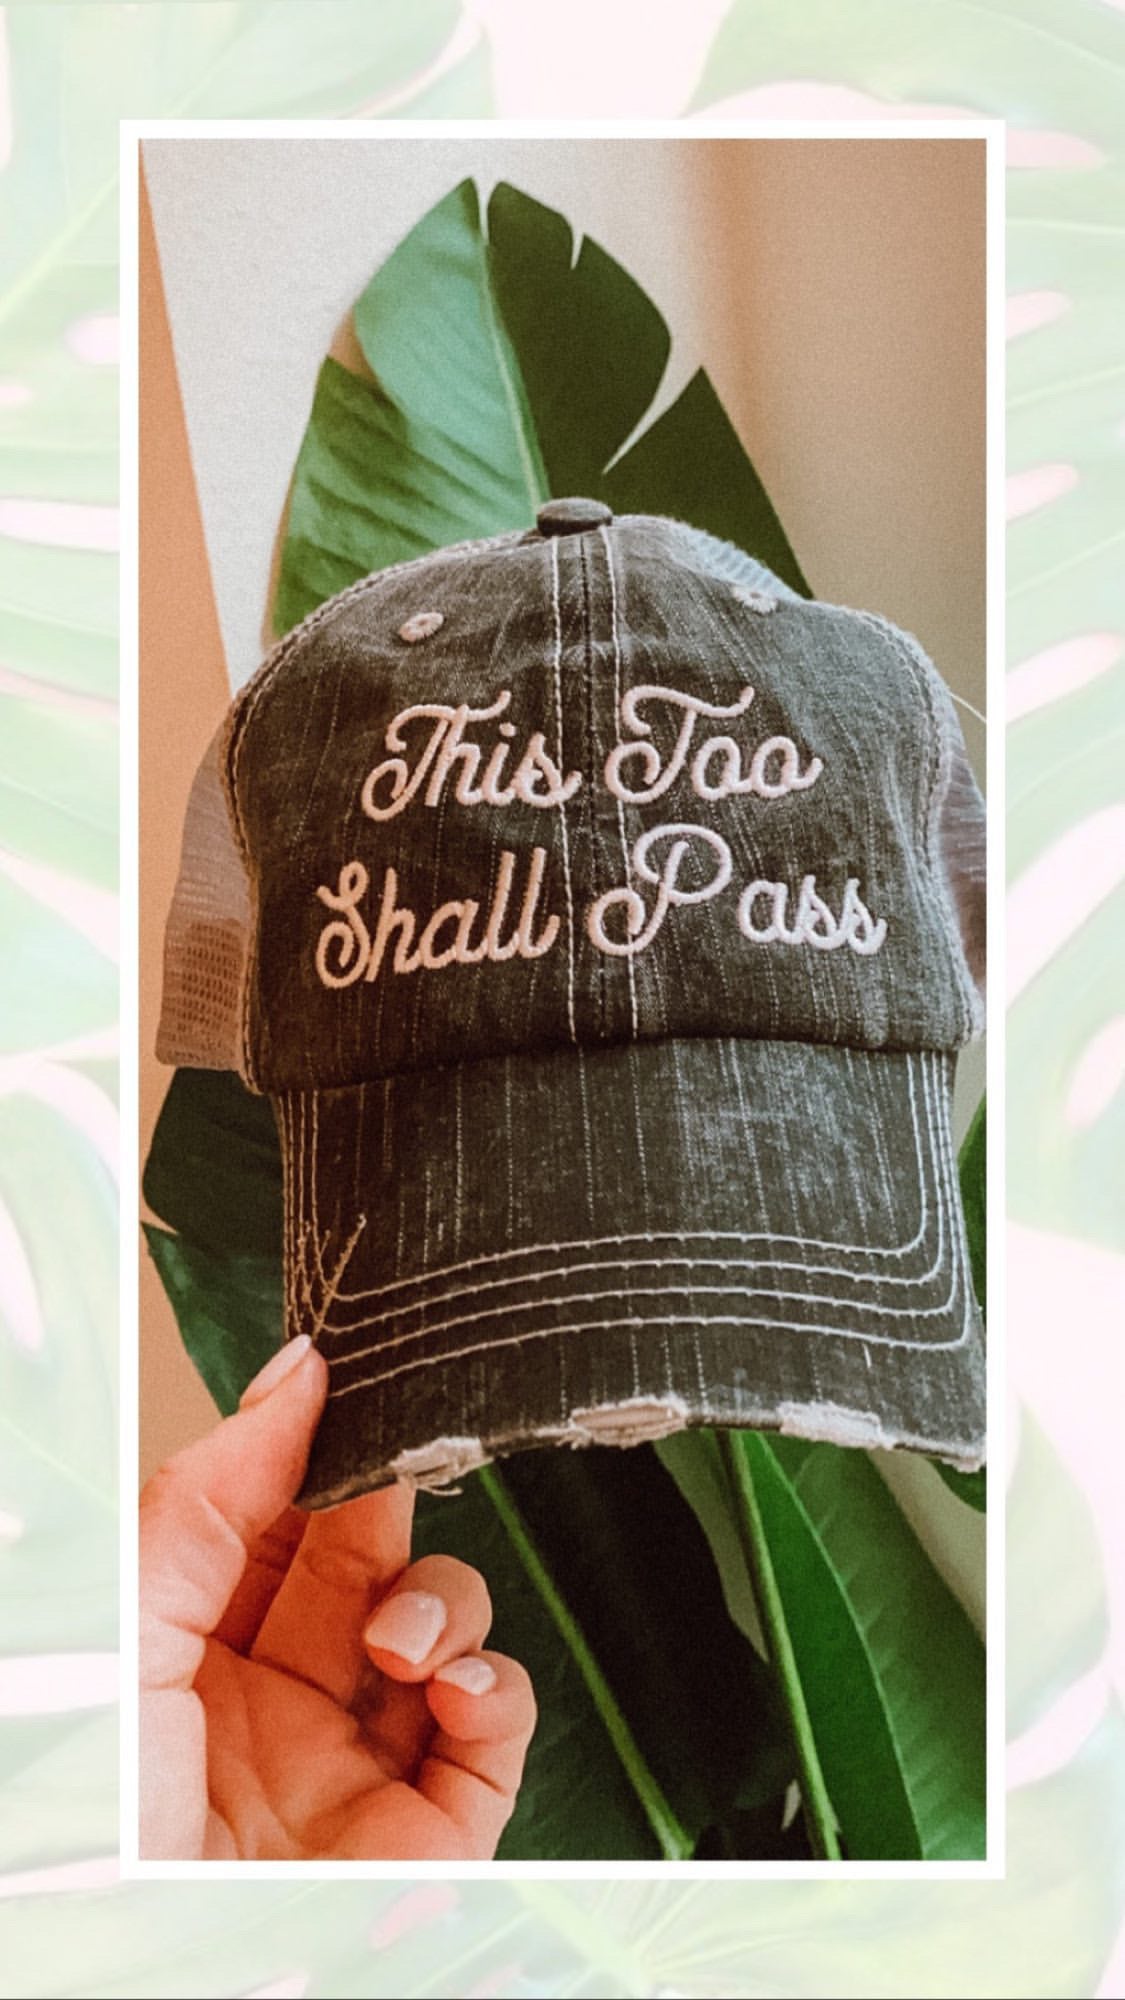 “This Too Shall Pass” Wholesale Women’s Inspirational Trucker Hats